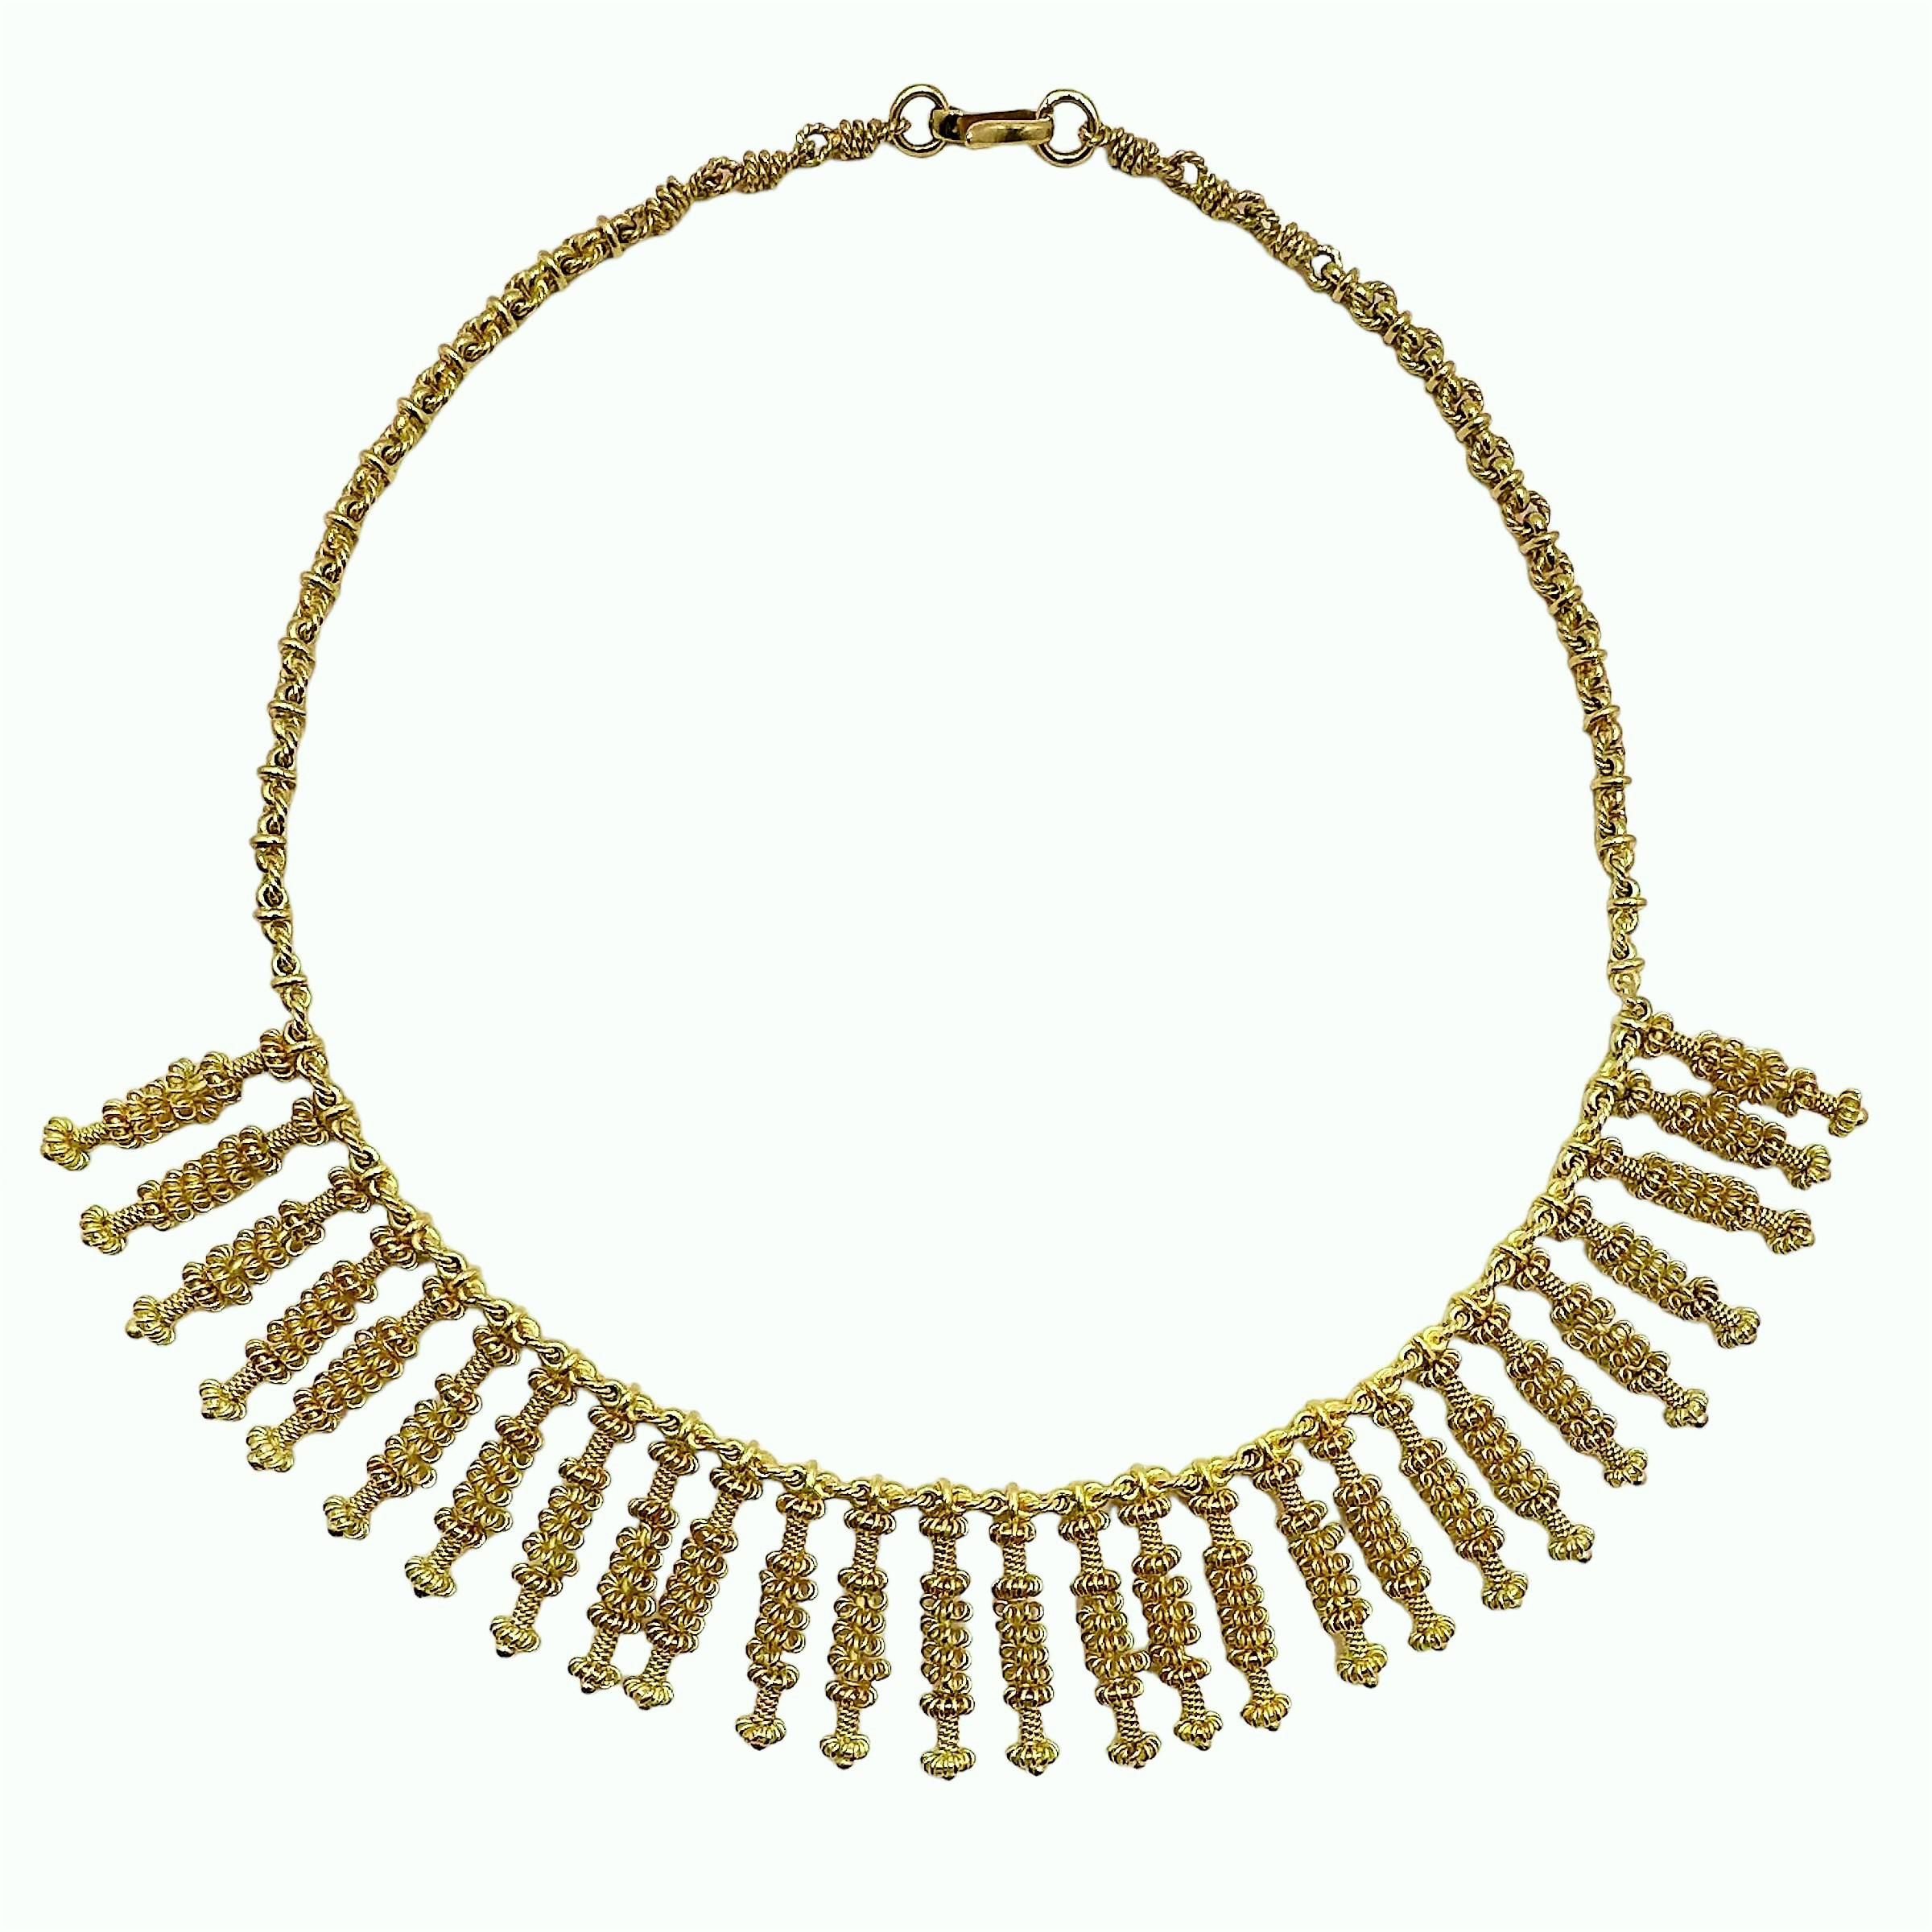 Masterpiece of Hand Filigree Choker Necklace in 18k Yellow Gold